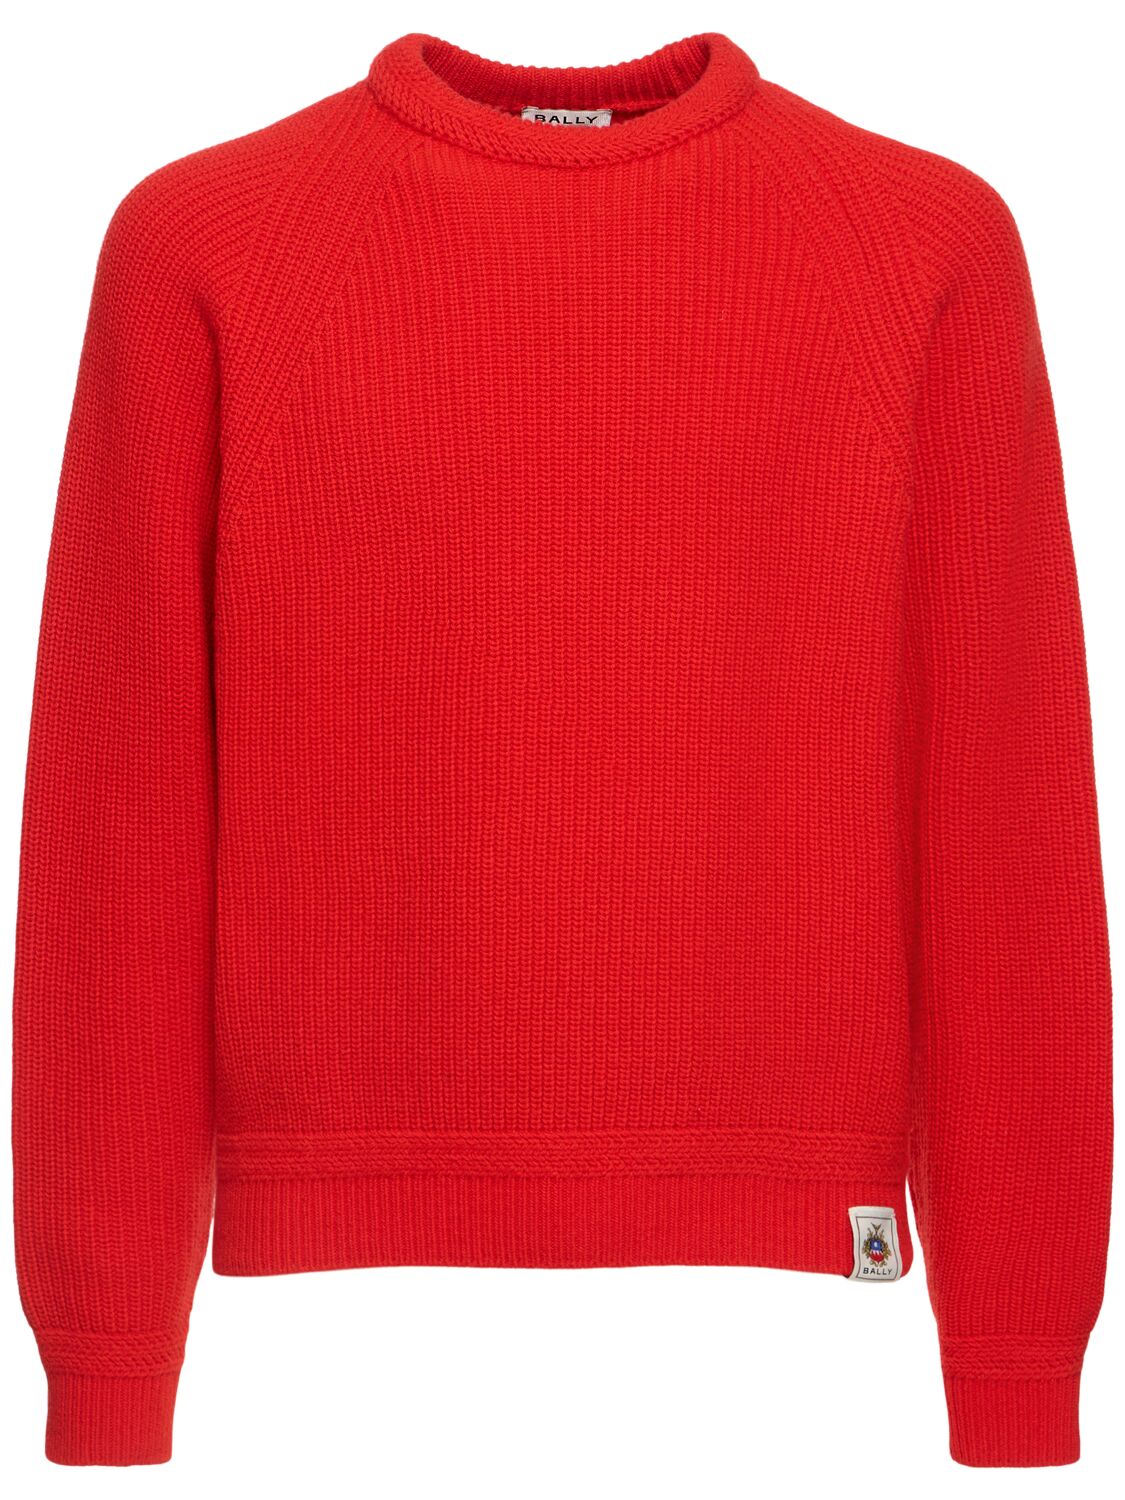 Bally Wool Knit Crewneck Sweater In Candy Red 50